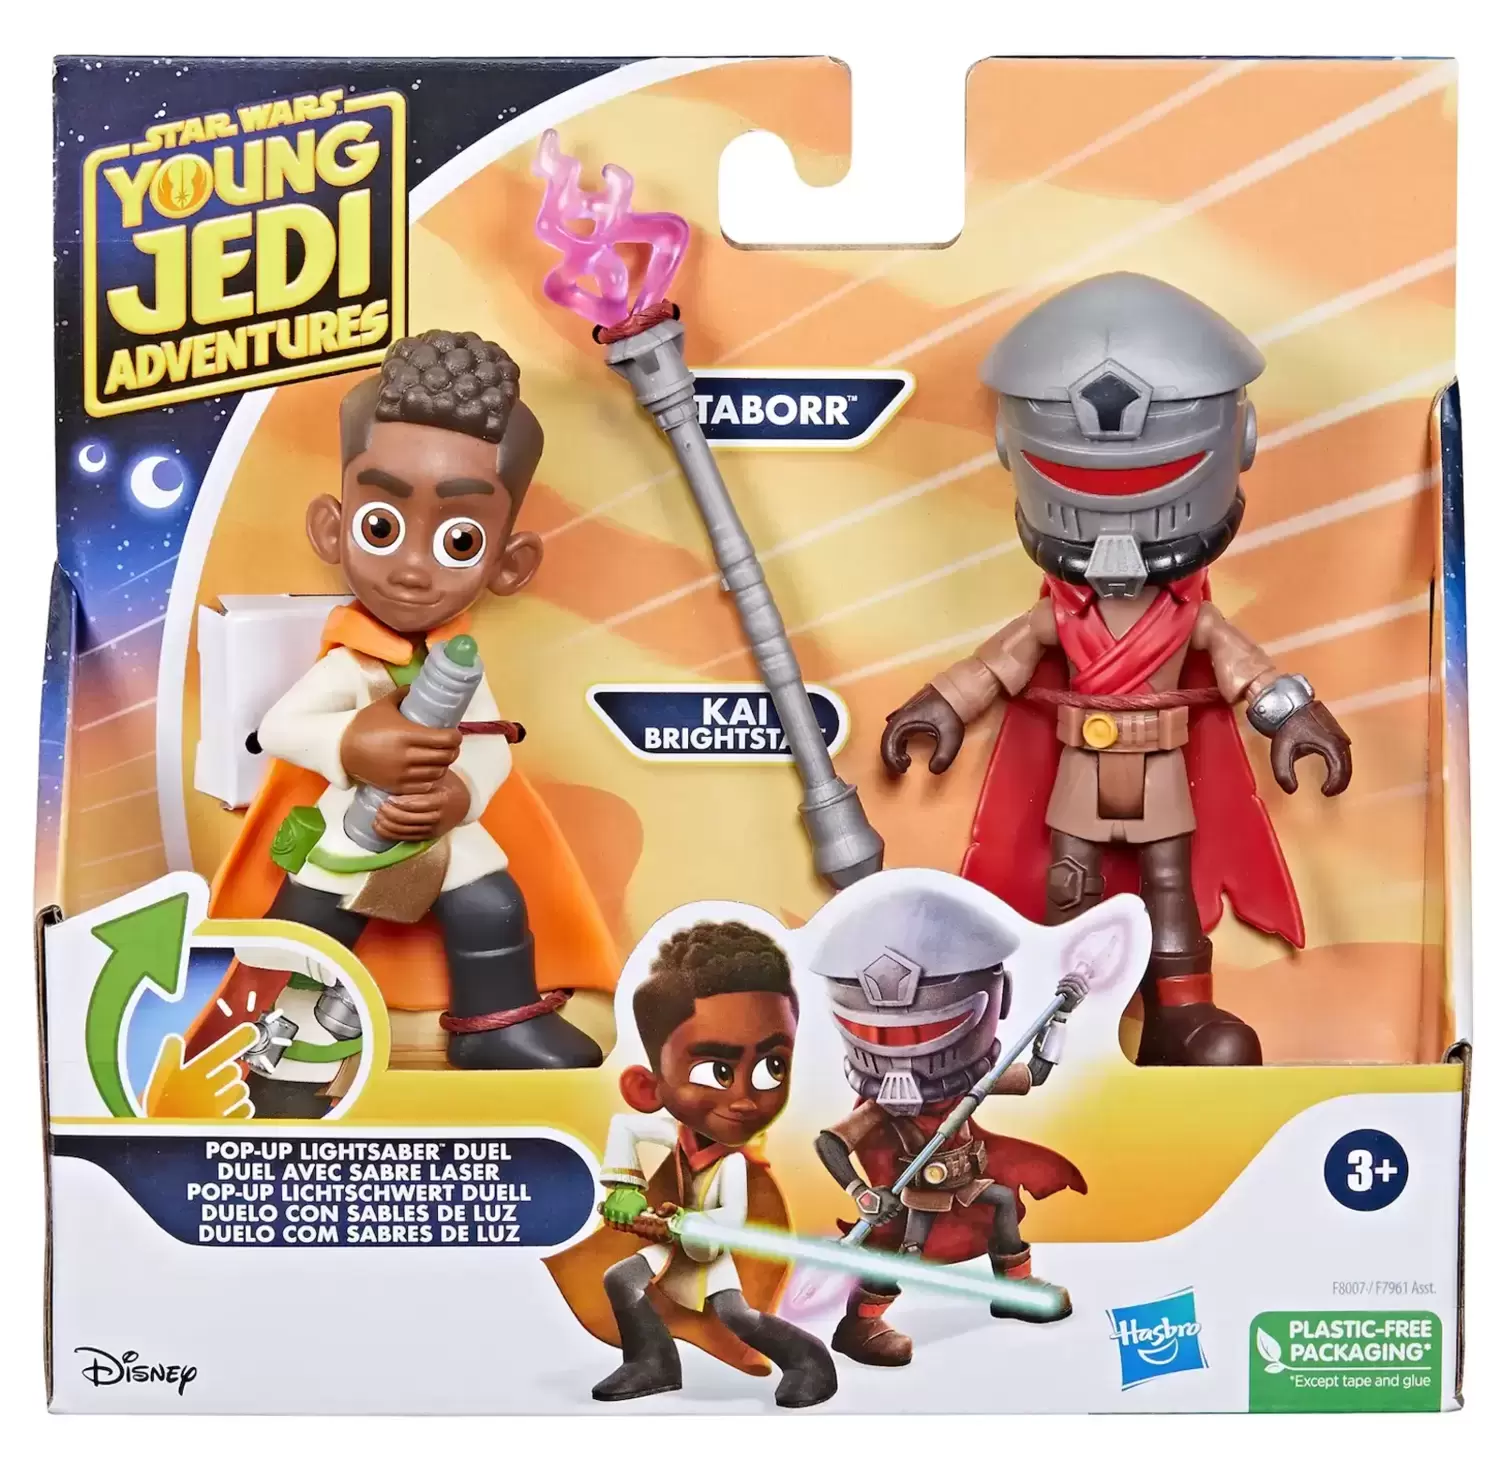 Young Jedi Adventures - Kai Brighstar and Taborr - Pop-Up Lightsaber Duel